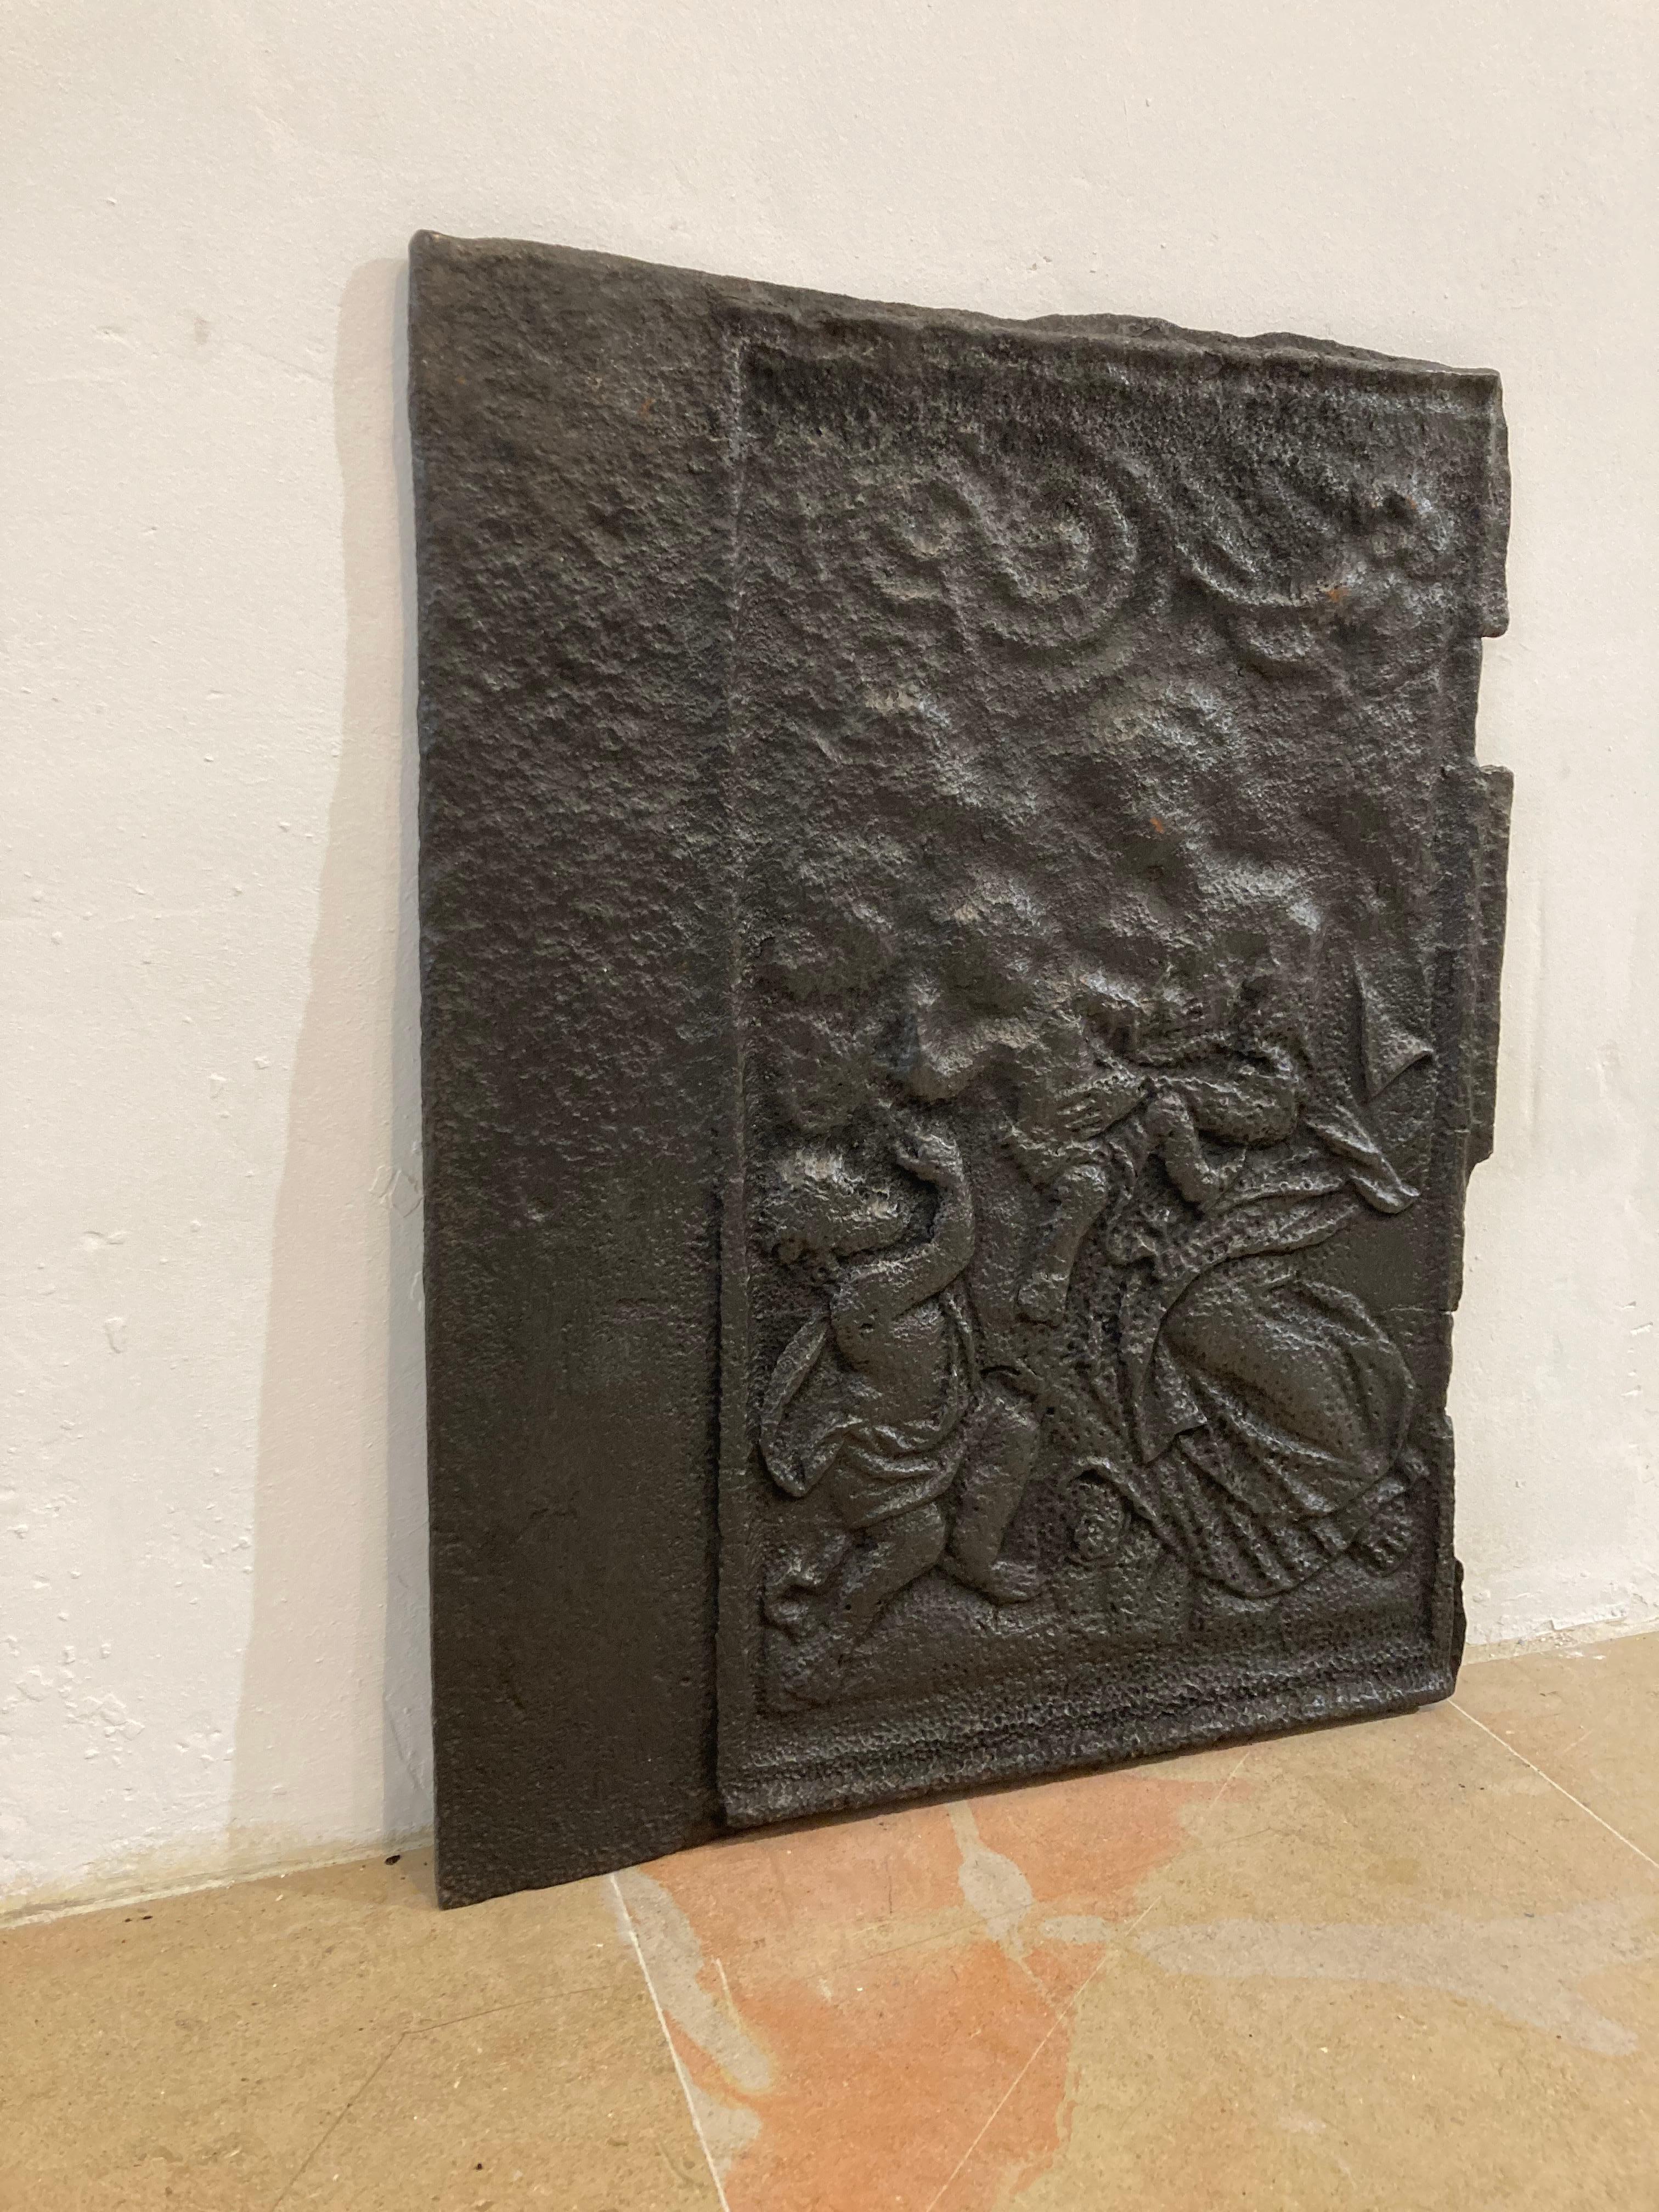 This antique fireback is in seriously used condition.
It displays caritas which means unlimited loving-kindness to all others or 